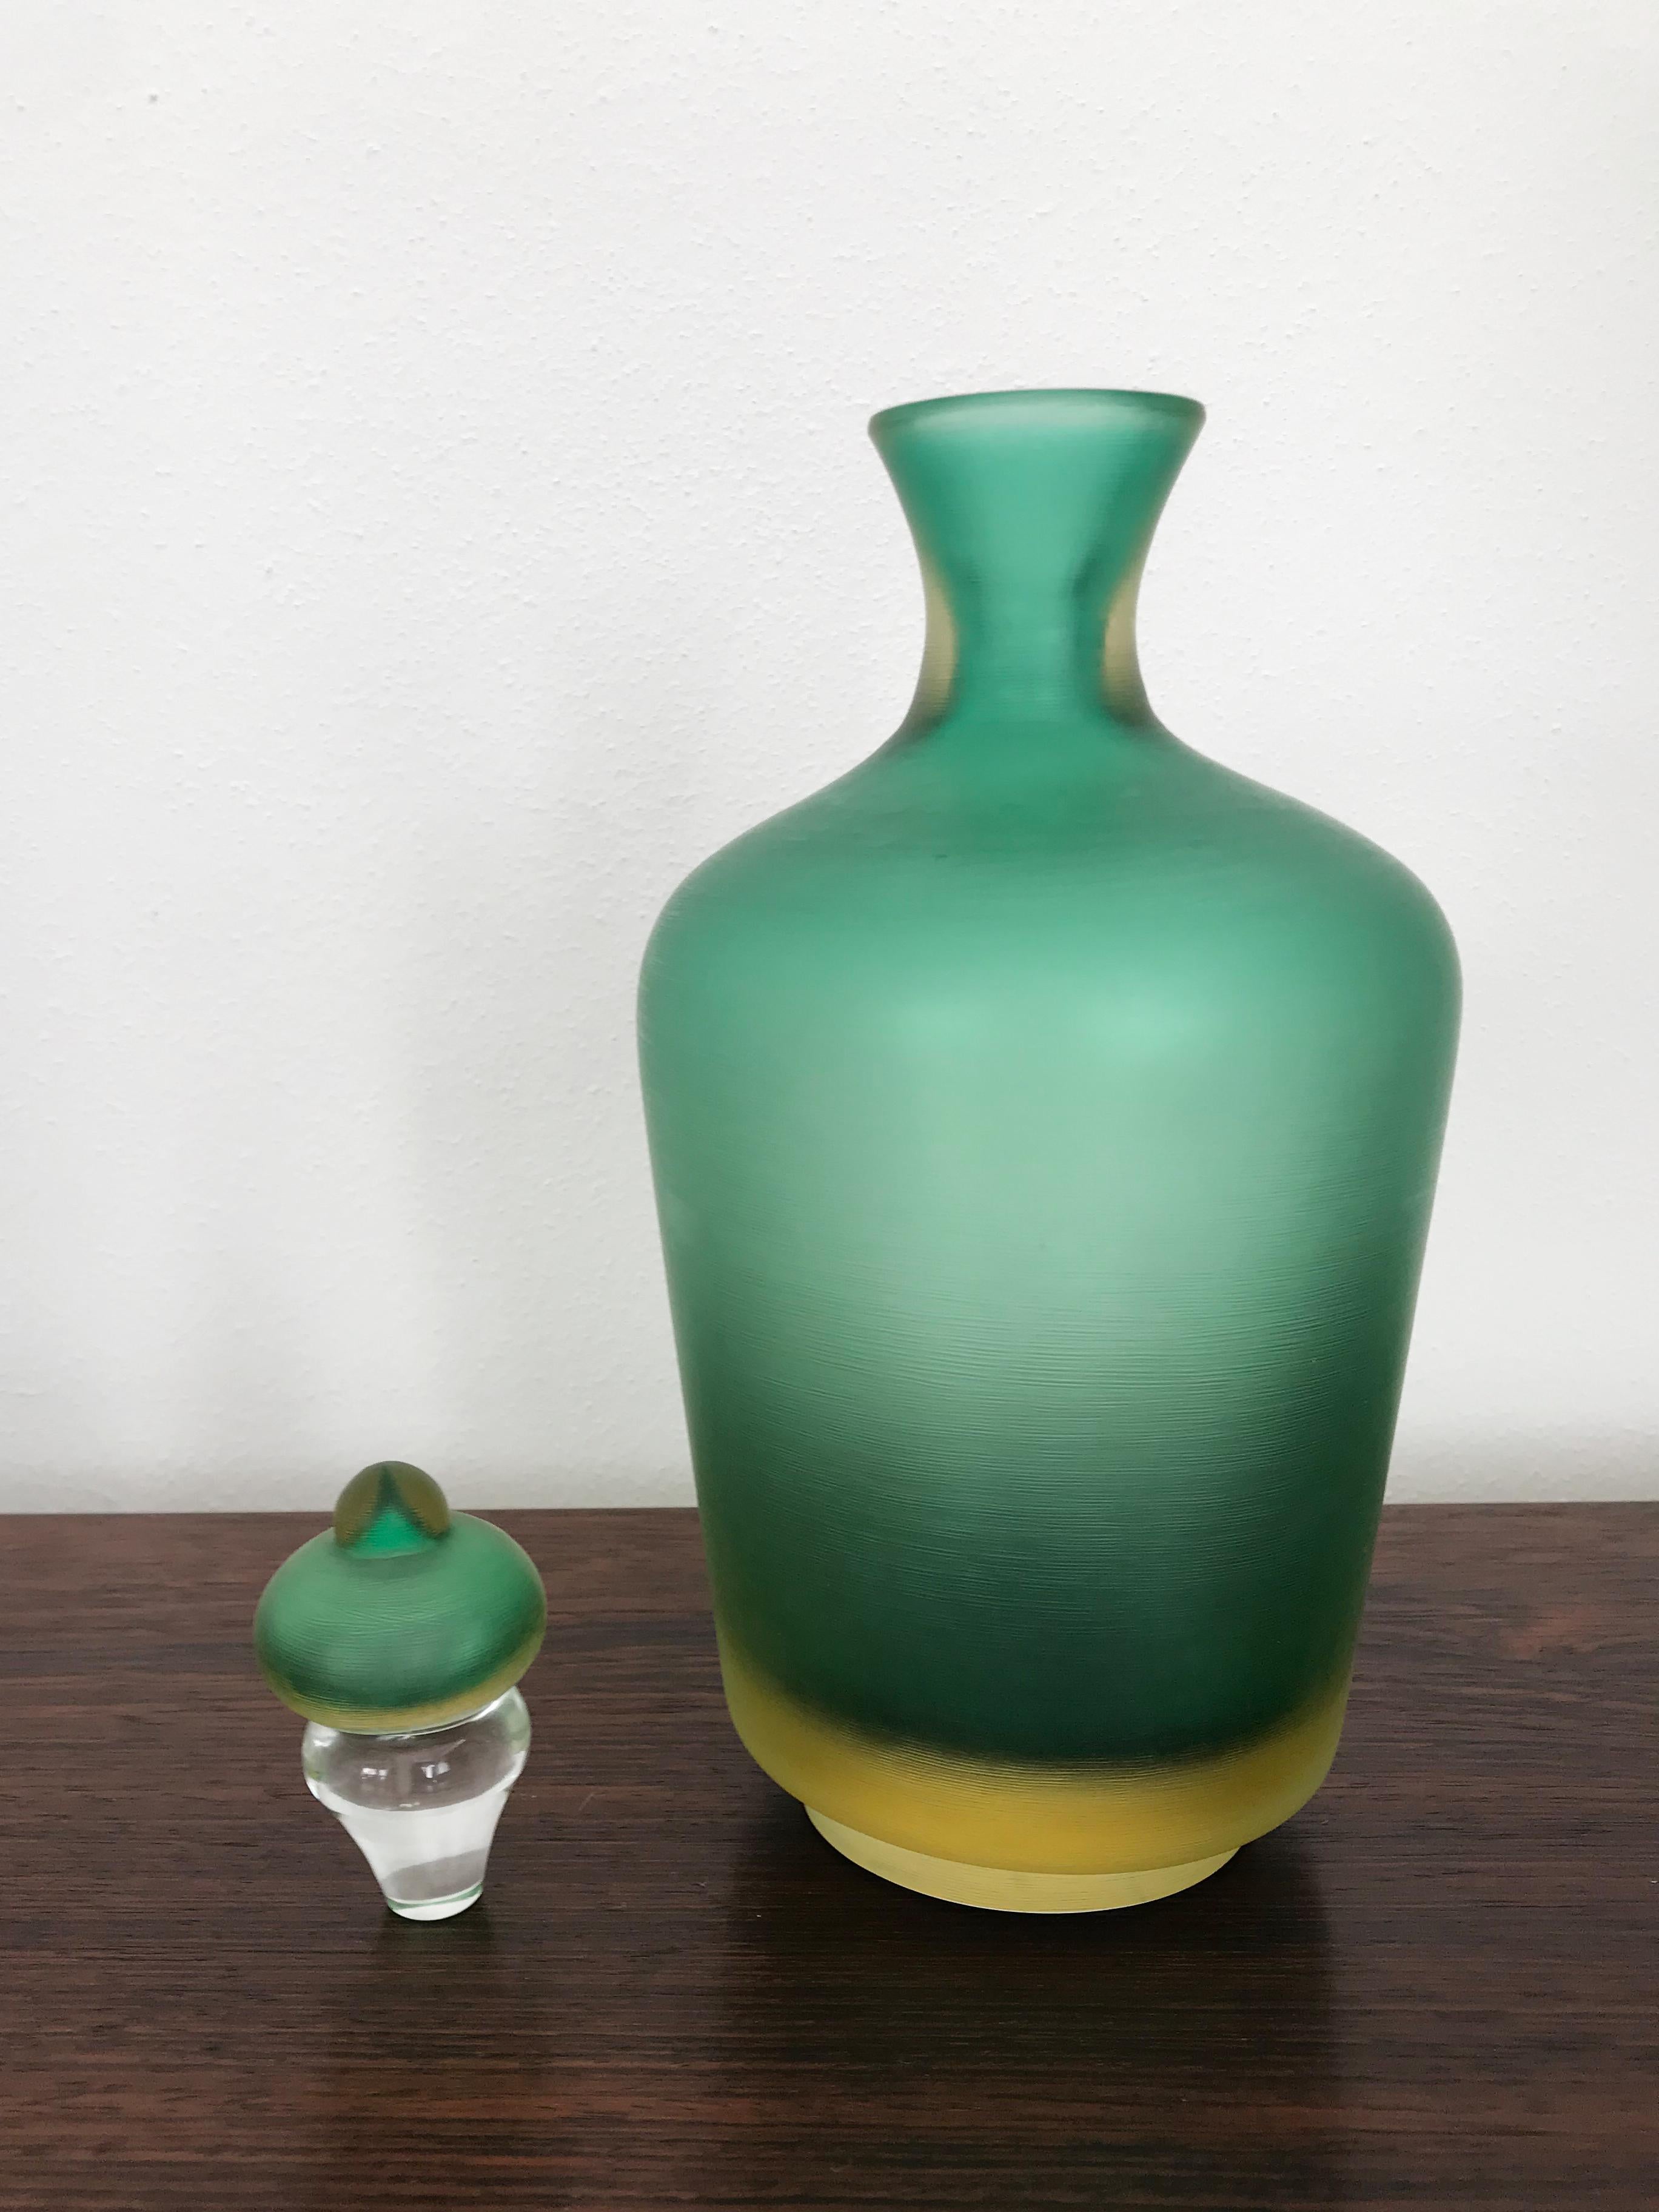 Italian glass bottle vasec with stopper, “Incisi” series, in two-color submerged glass with surface entirely worked by grinding produced by Venini Murano, Venini trademark 2004 engraved on the base.
Limited edition.
Please note that the item is